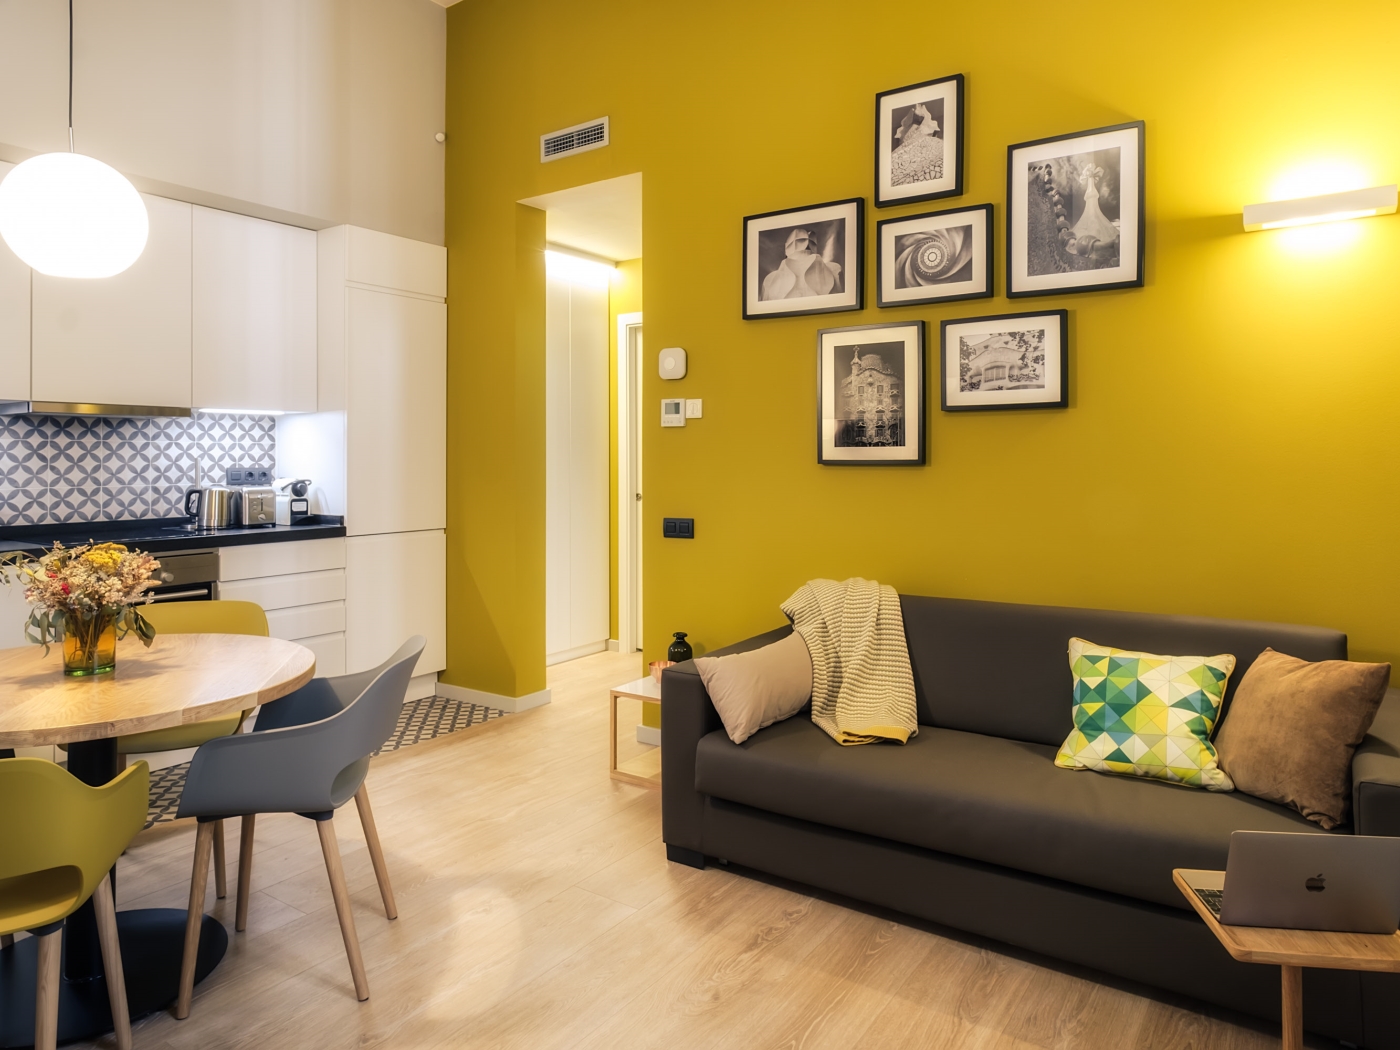 Spacious and cossy apartment for monthly rentals - My Space Barcelona Apartments